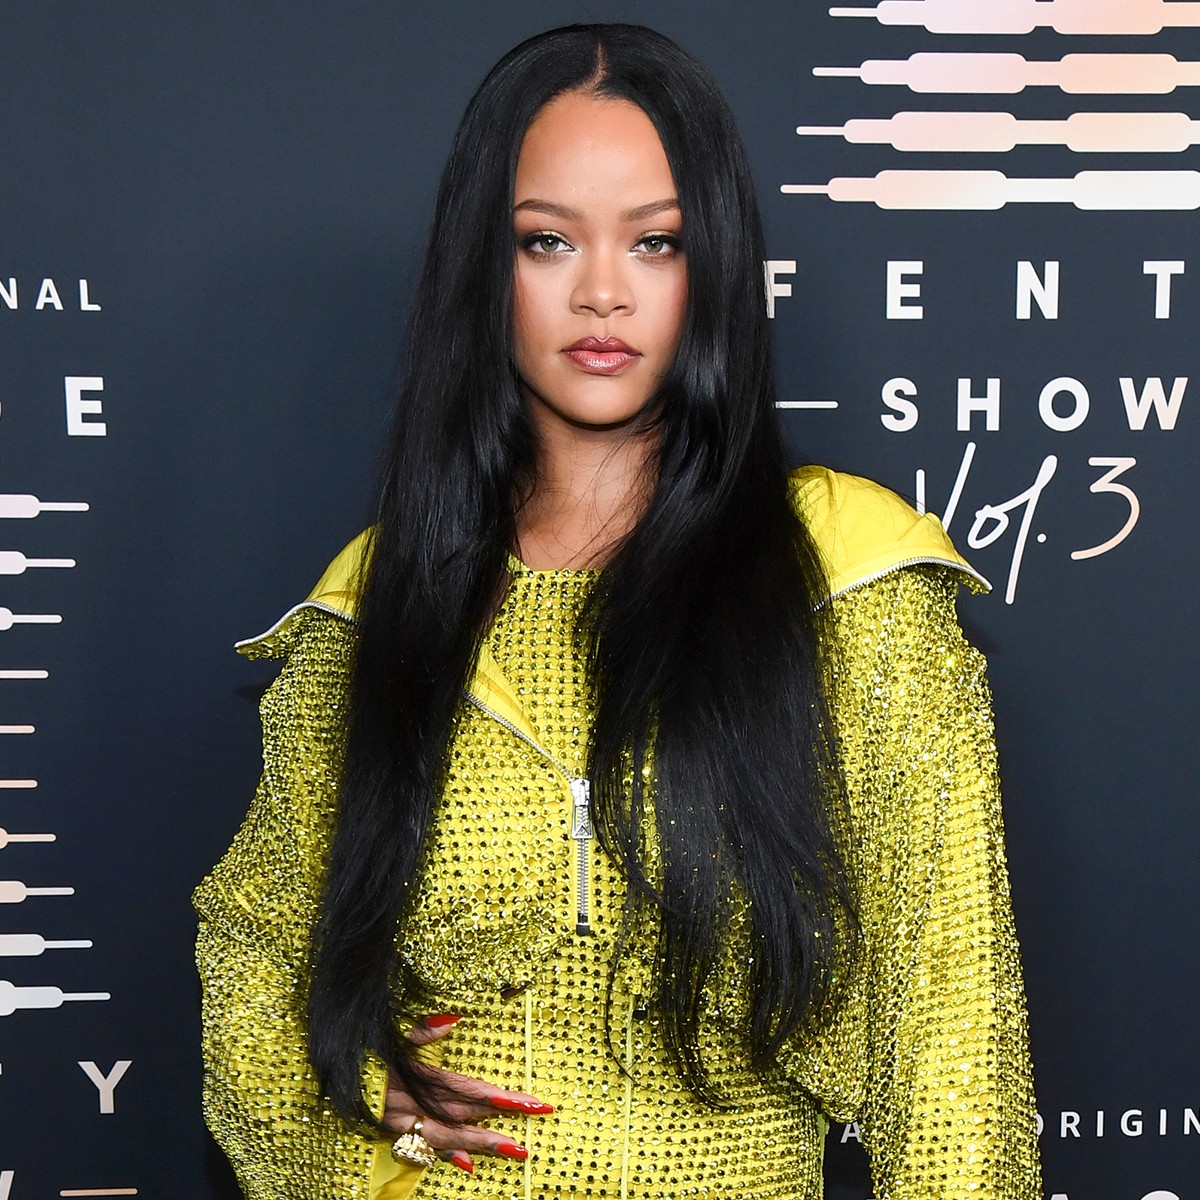 Rihanna attends the premiere of Rihanna's Savage X Fenty Show Vol. 3  News Photo - Getty Images